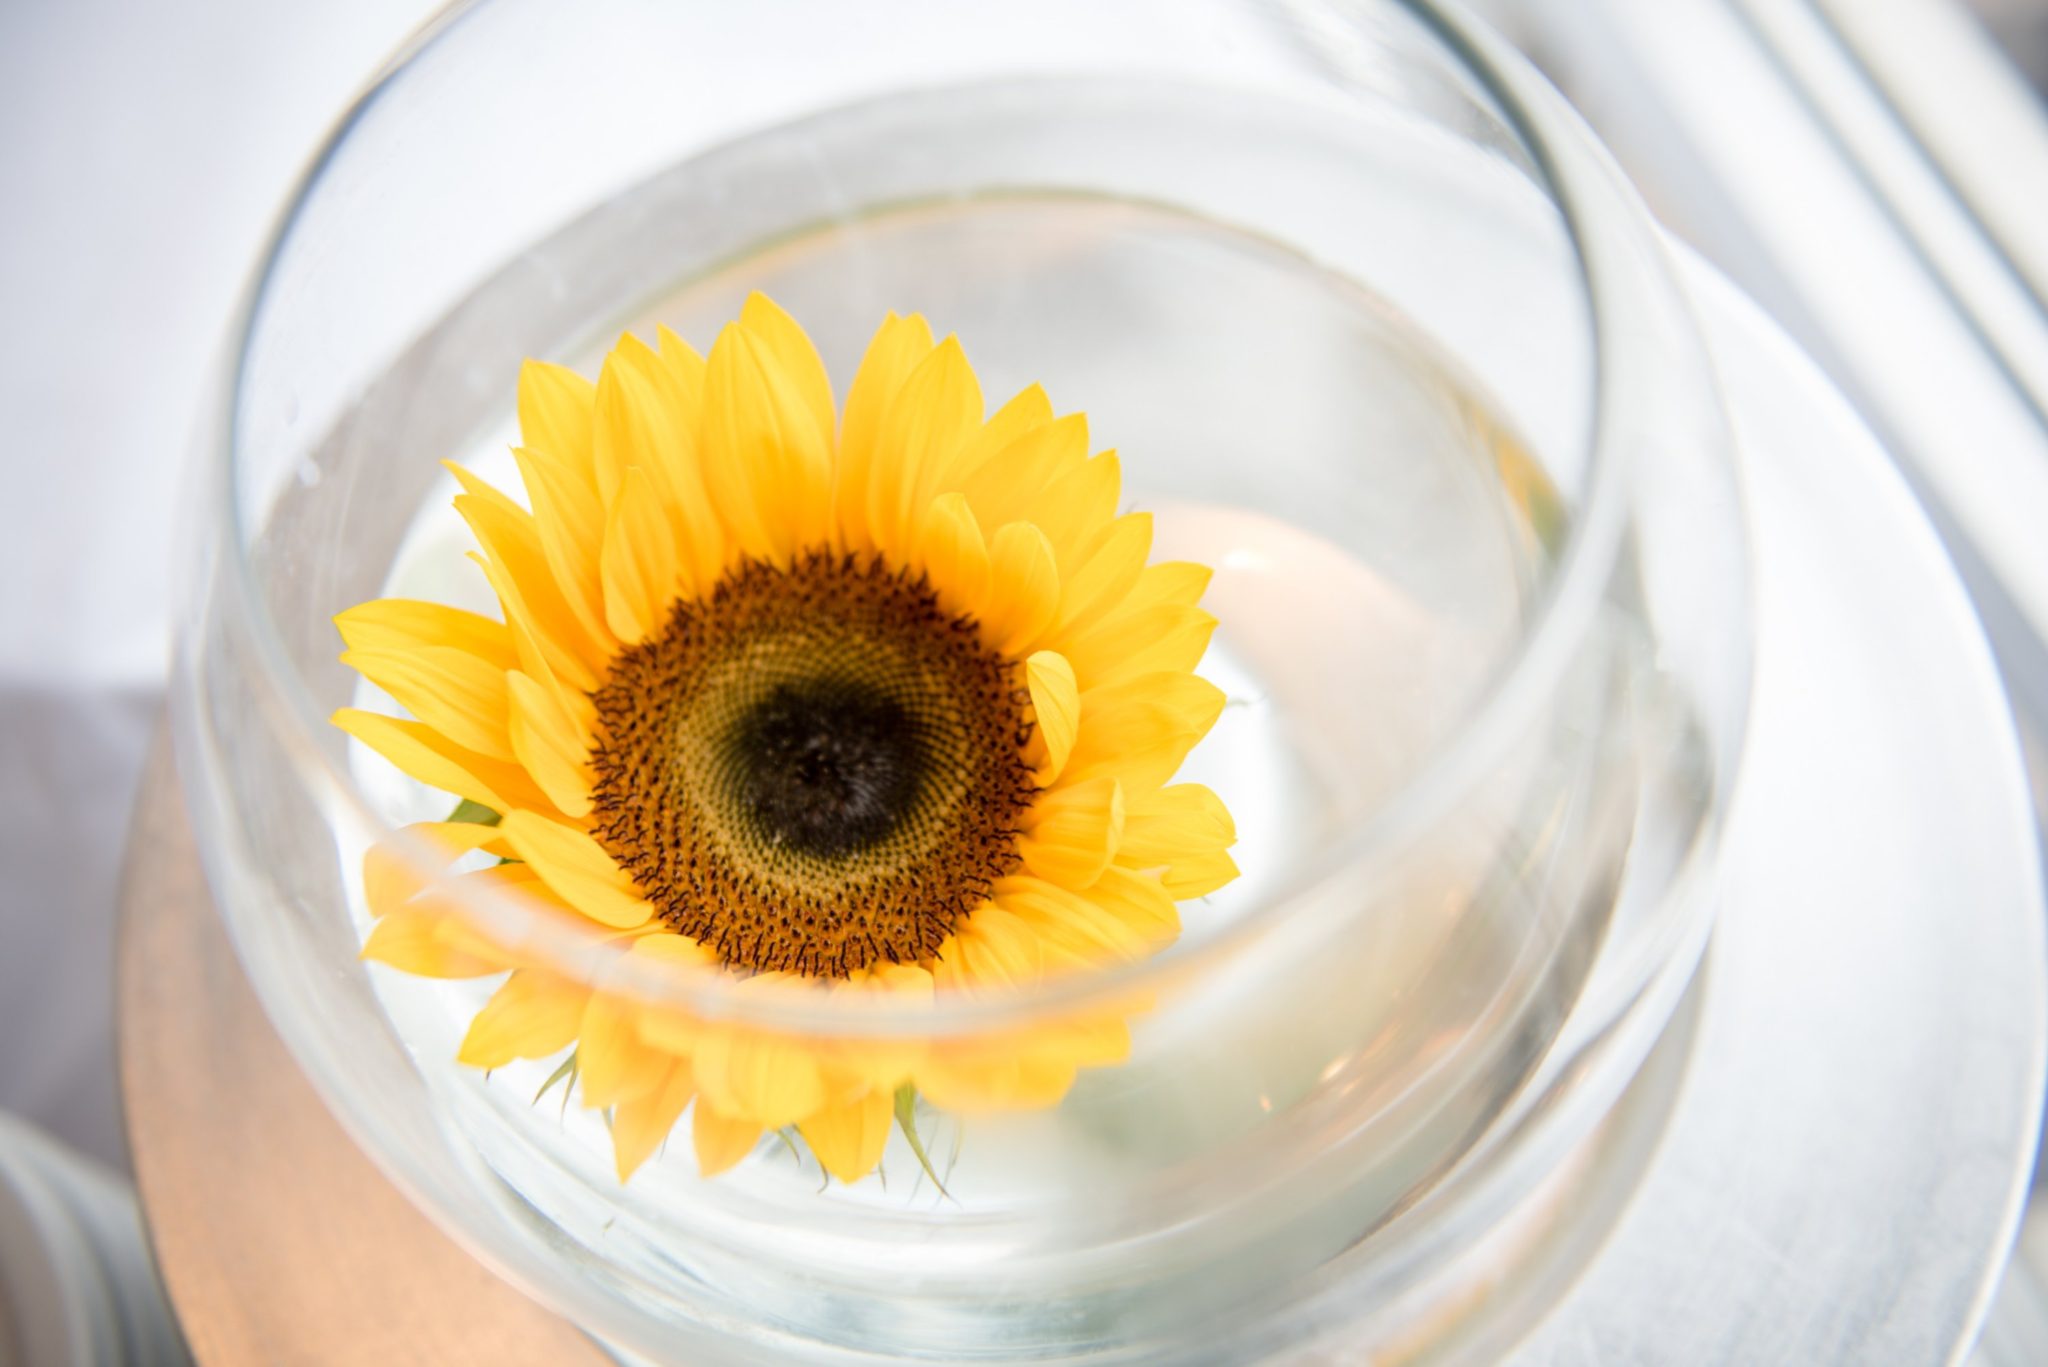 Sunflower seeds are rich in magnesium